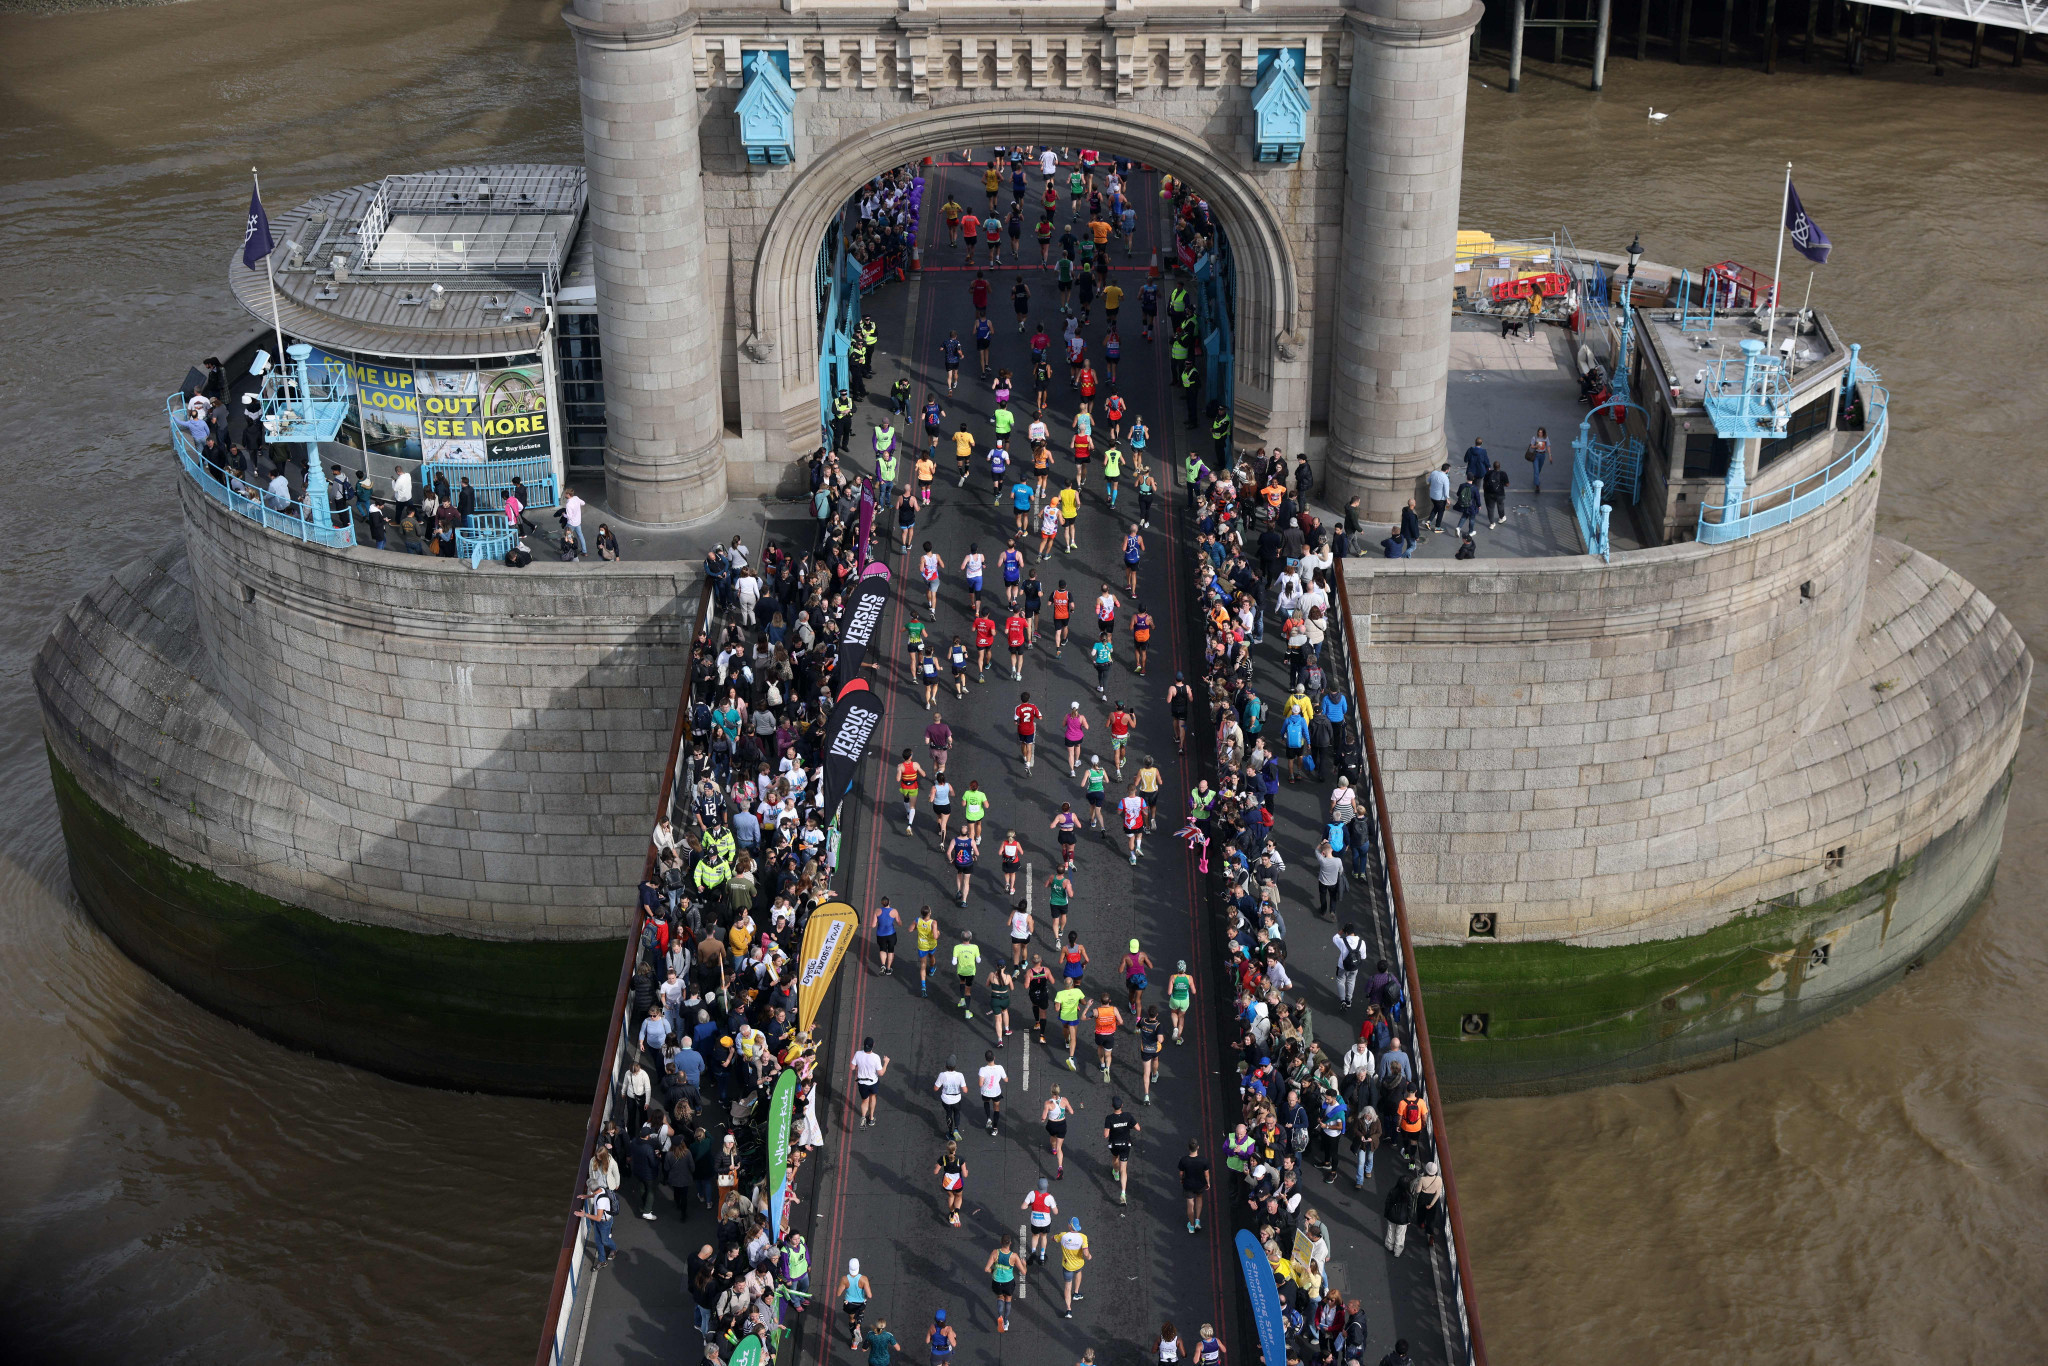 A series of initiatives have been launched by the London Marathon this year to make the race more sustainable and protect the environment ©Getty Images